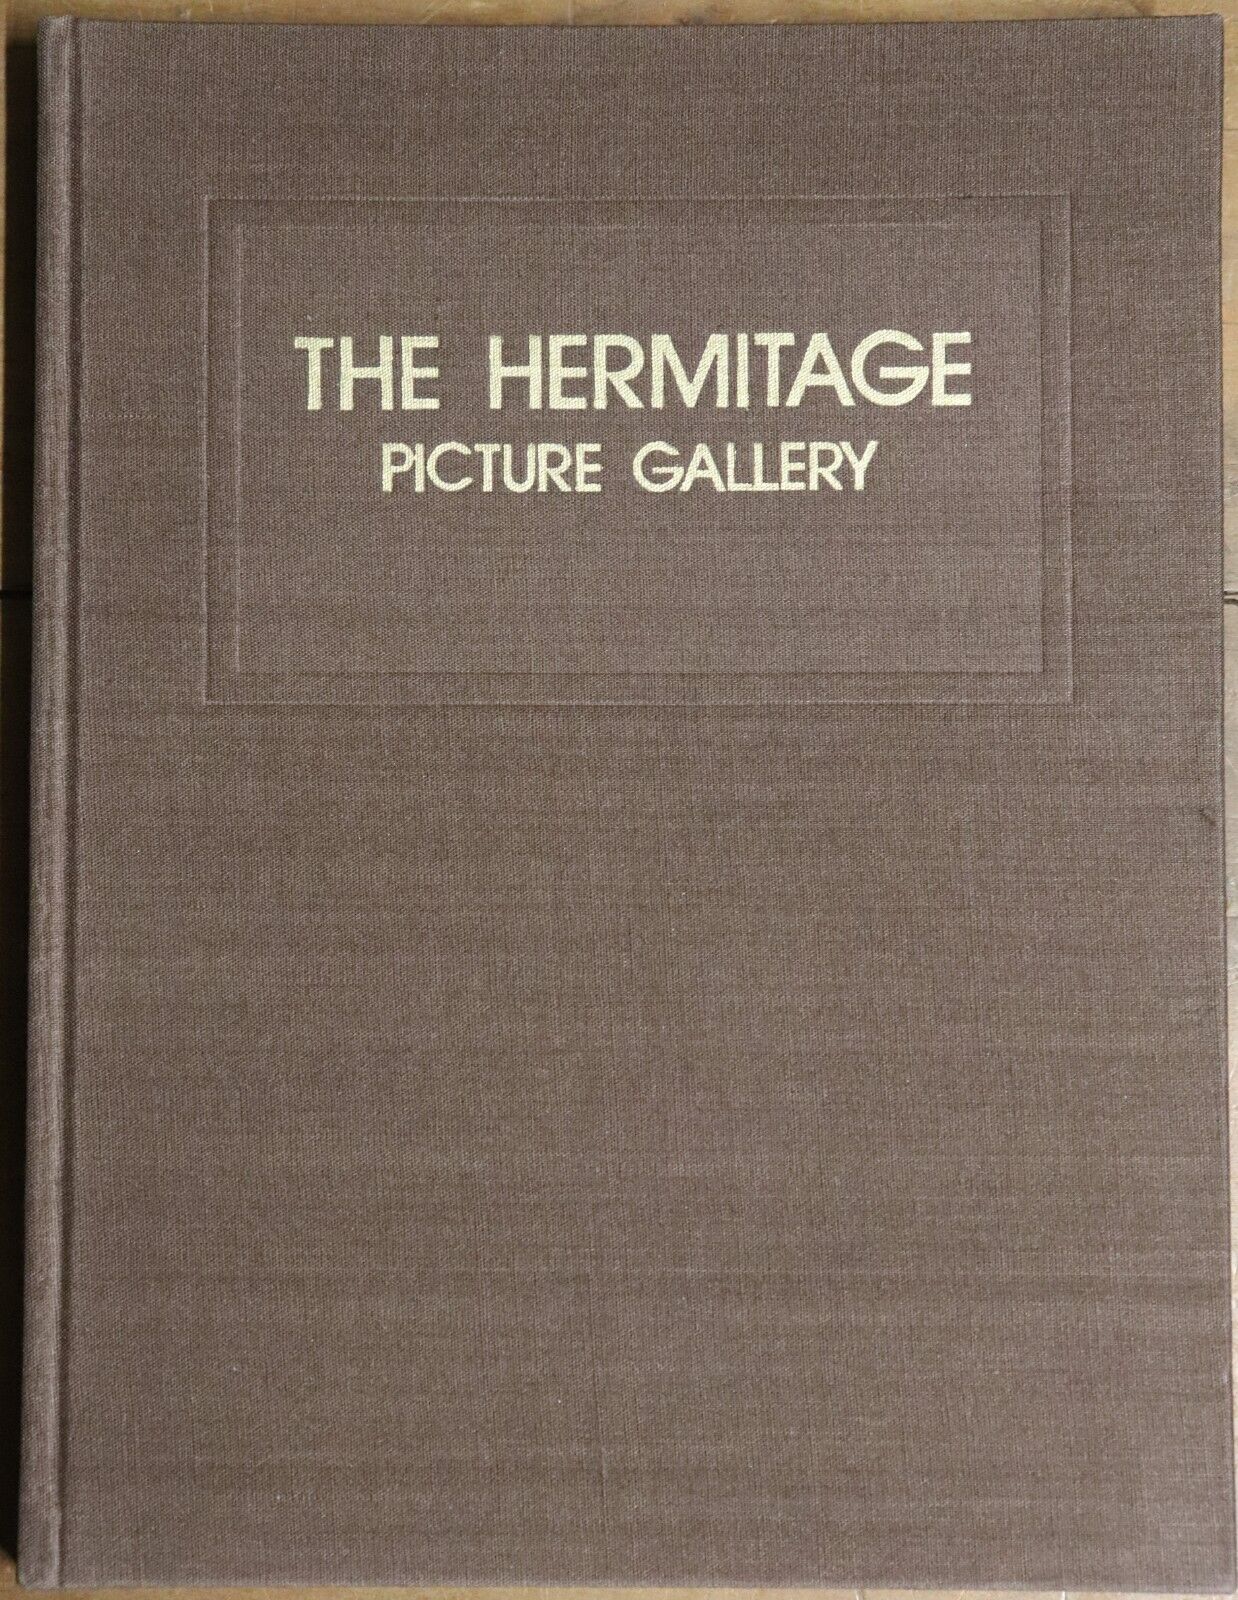 The Hermitage Picture Gallery: Western European - 1979 - Art History Book